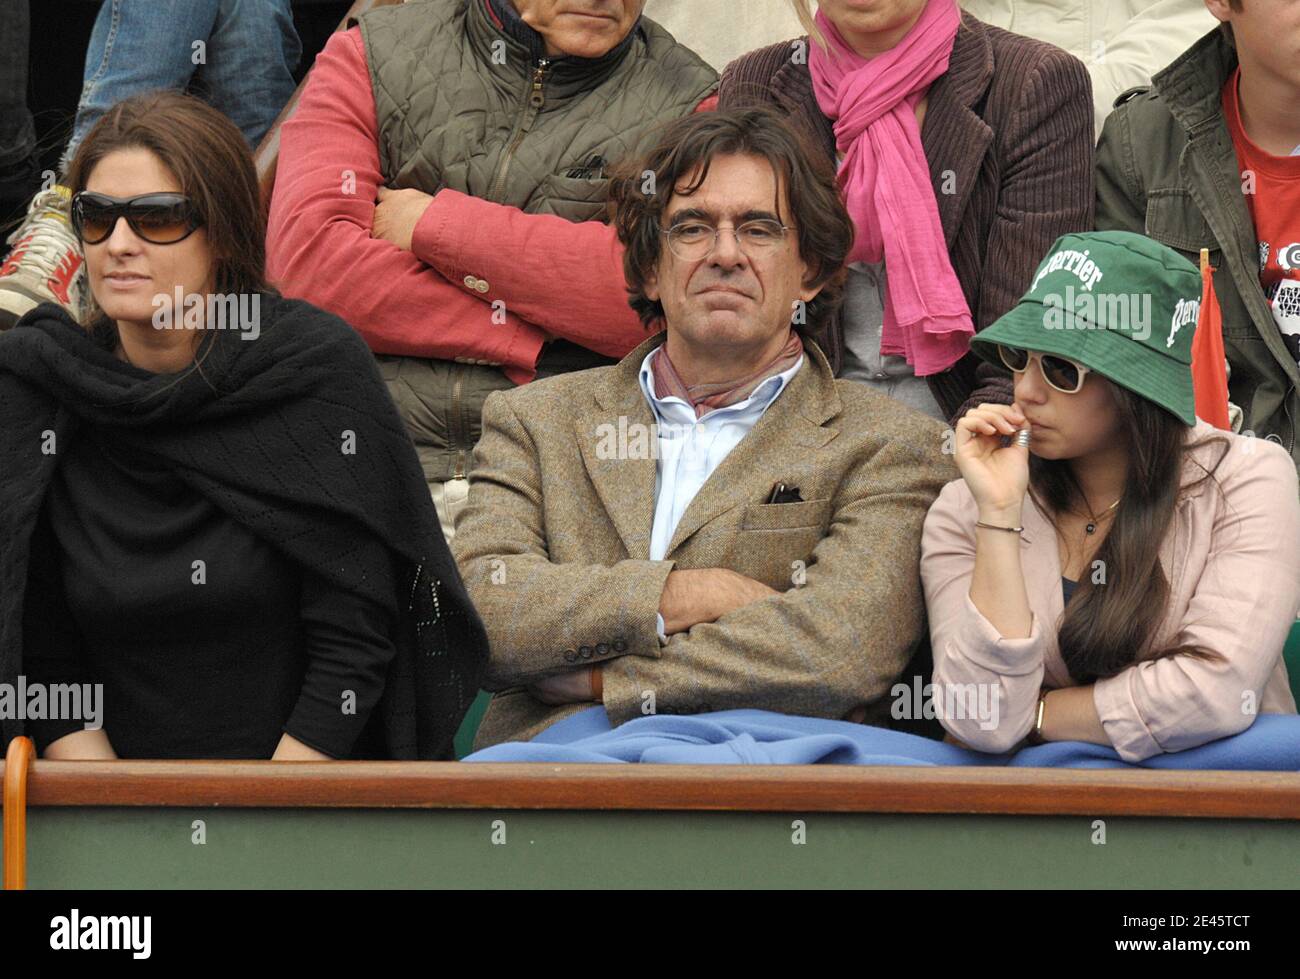 Luc Ferry and his wife Marie-Caroline attend the Men's Singles Final match (Roger Federer against Robin Soderling), of the French Open 2009, played at the Roland Garros stadium in Paris, France, on June 7, 2009. Photo by Gorassini-Guignebourg/ABACAPRESS.COM Stock Photo